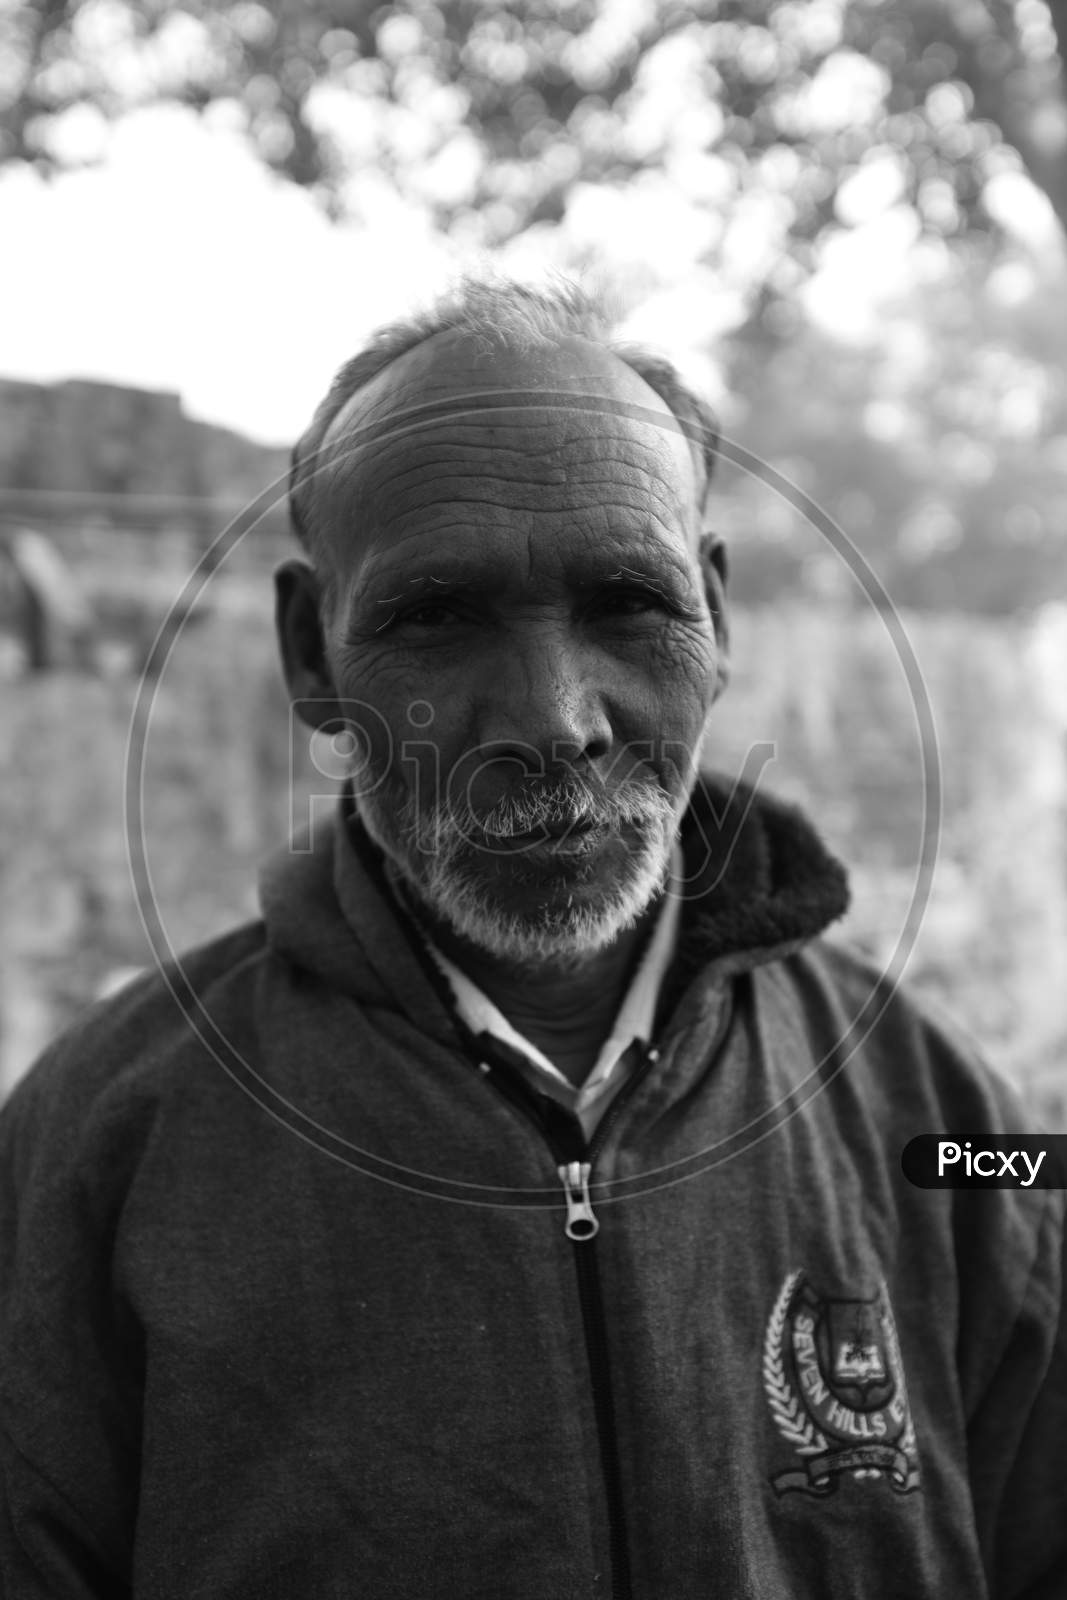 Portrait Of An Farmer In Indian Rural Villages